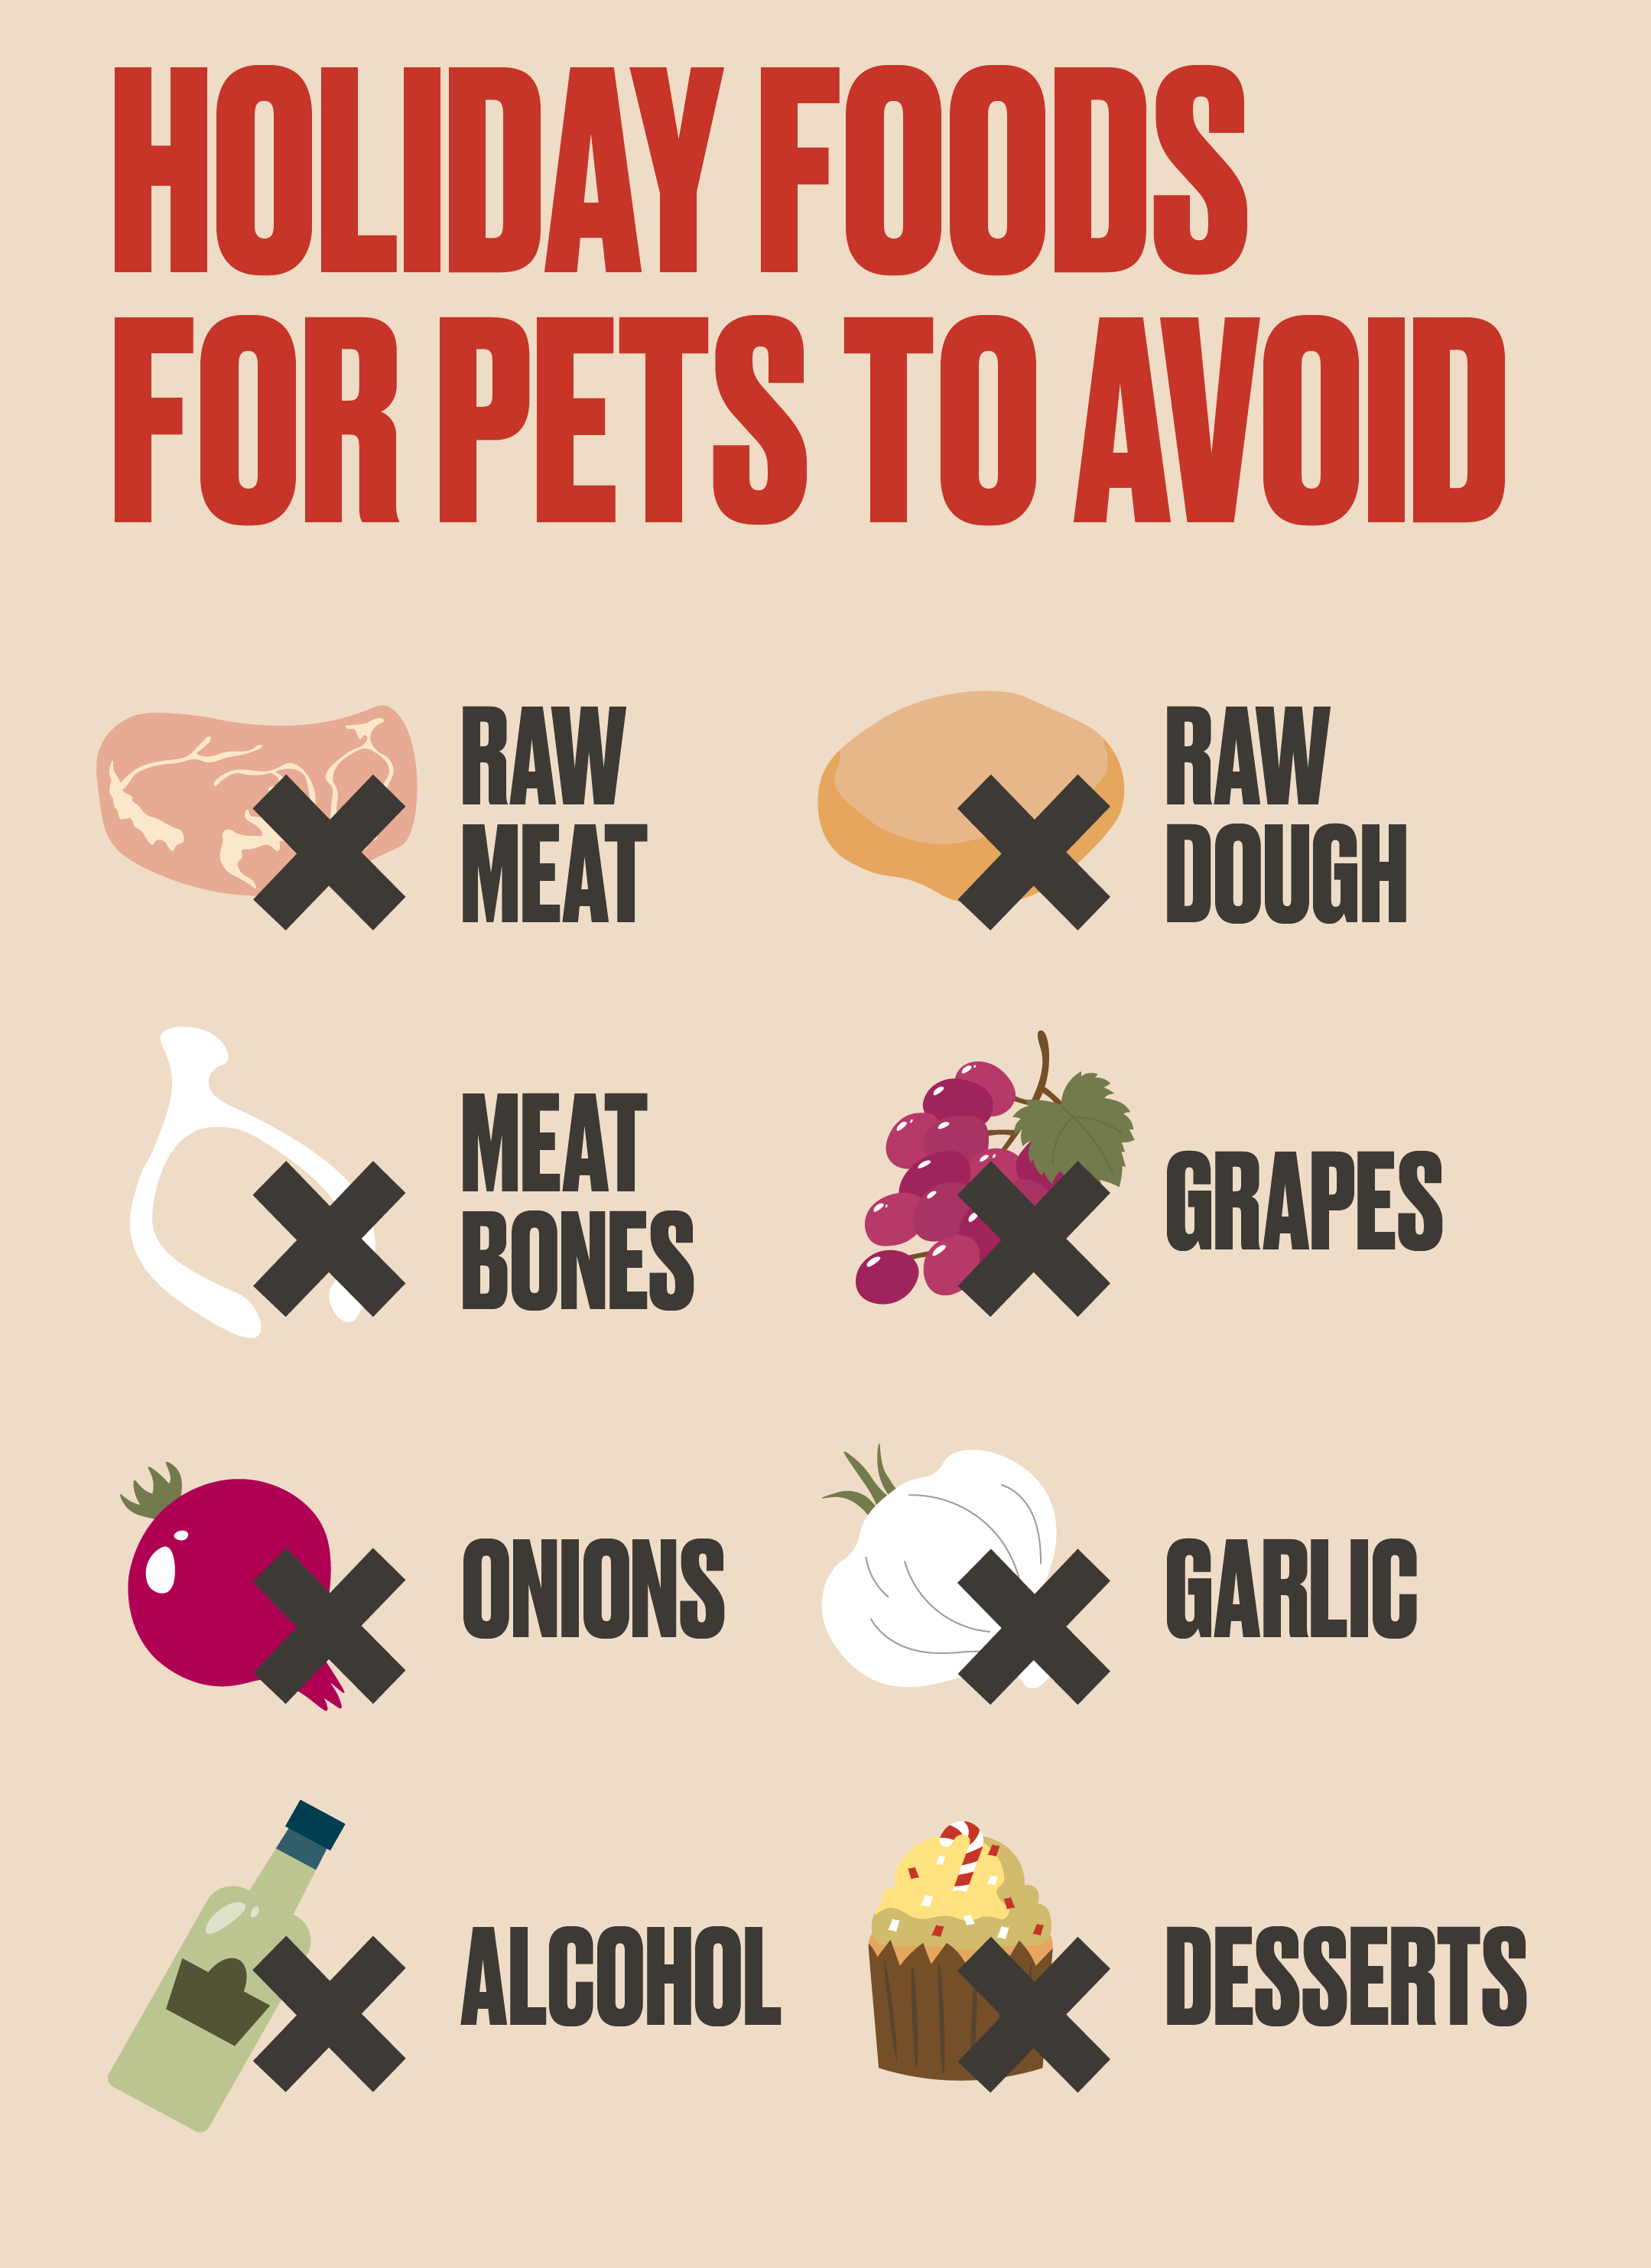 common holiday foods with potential harm to various pets.